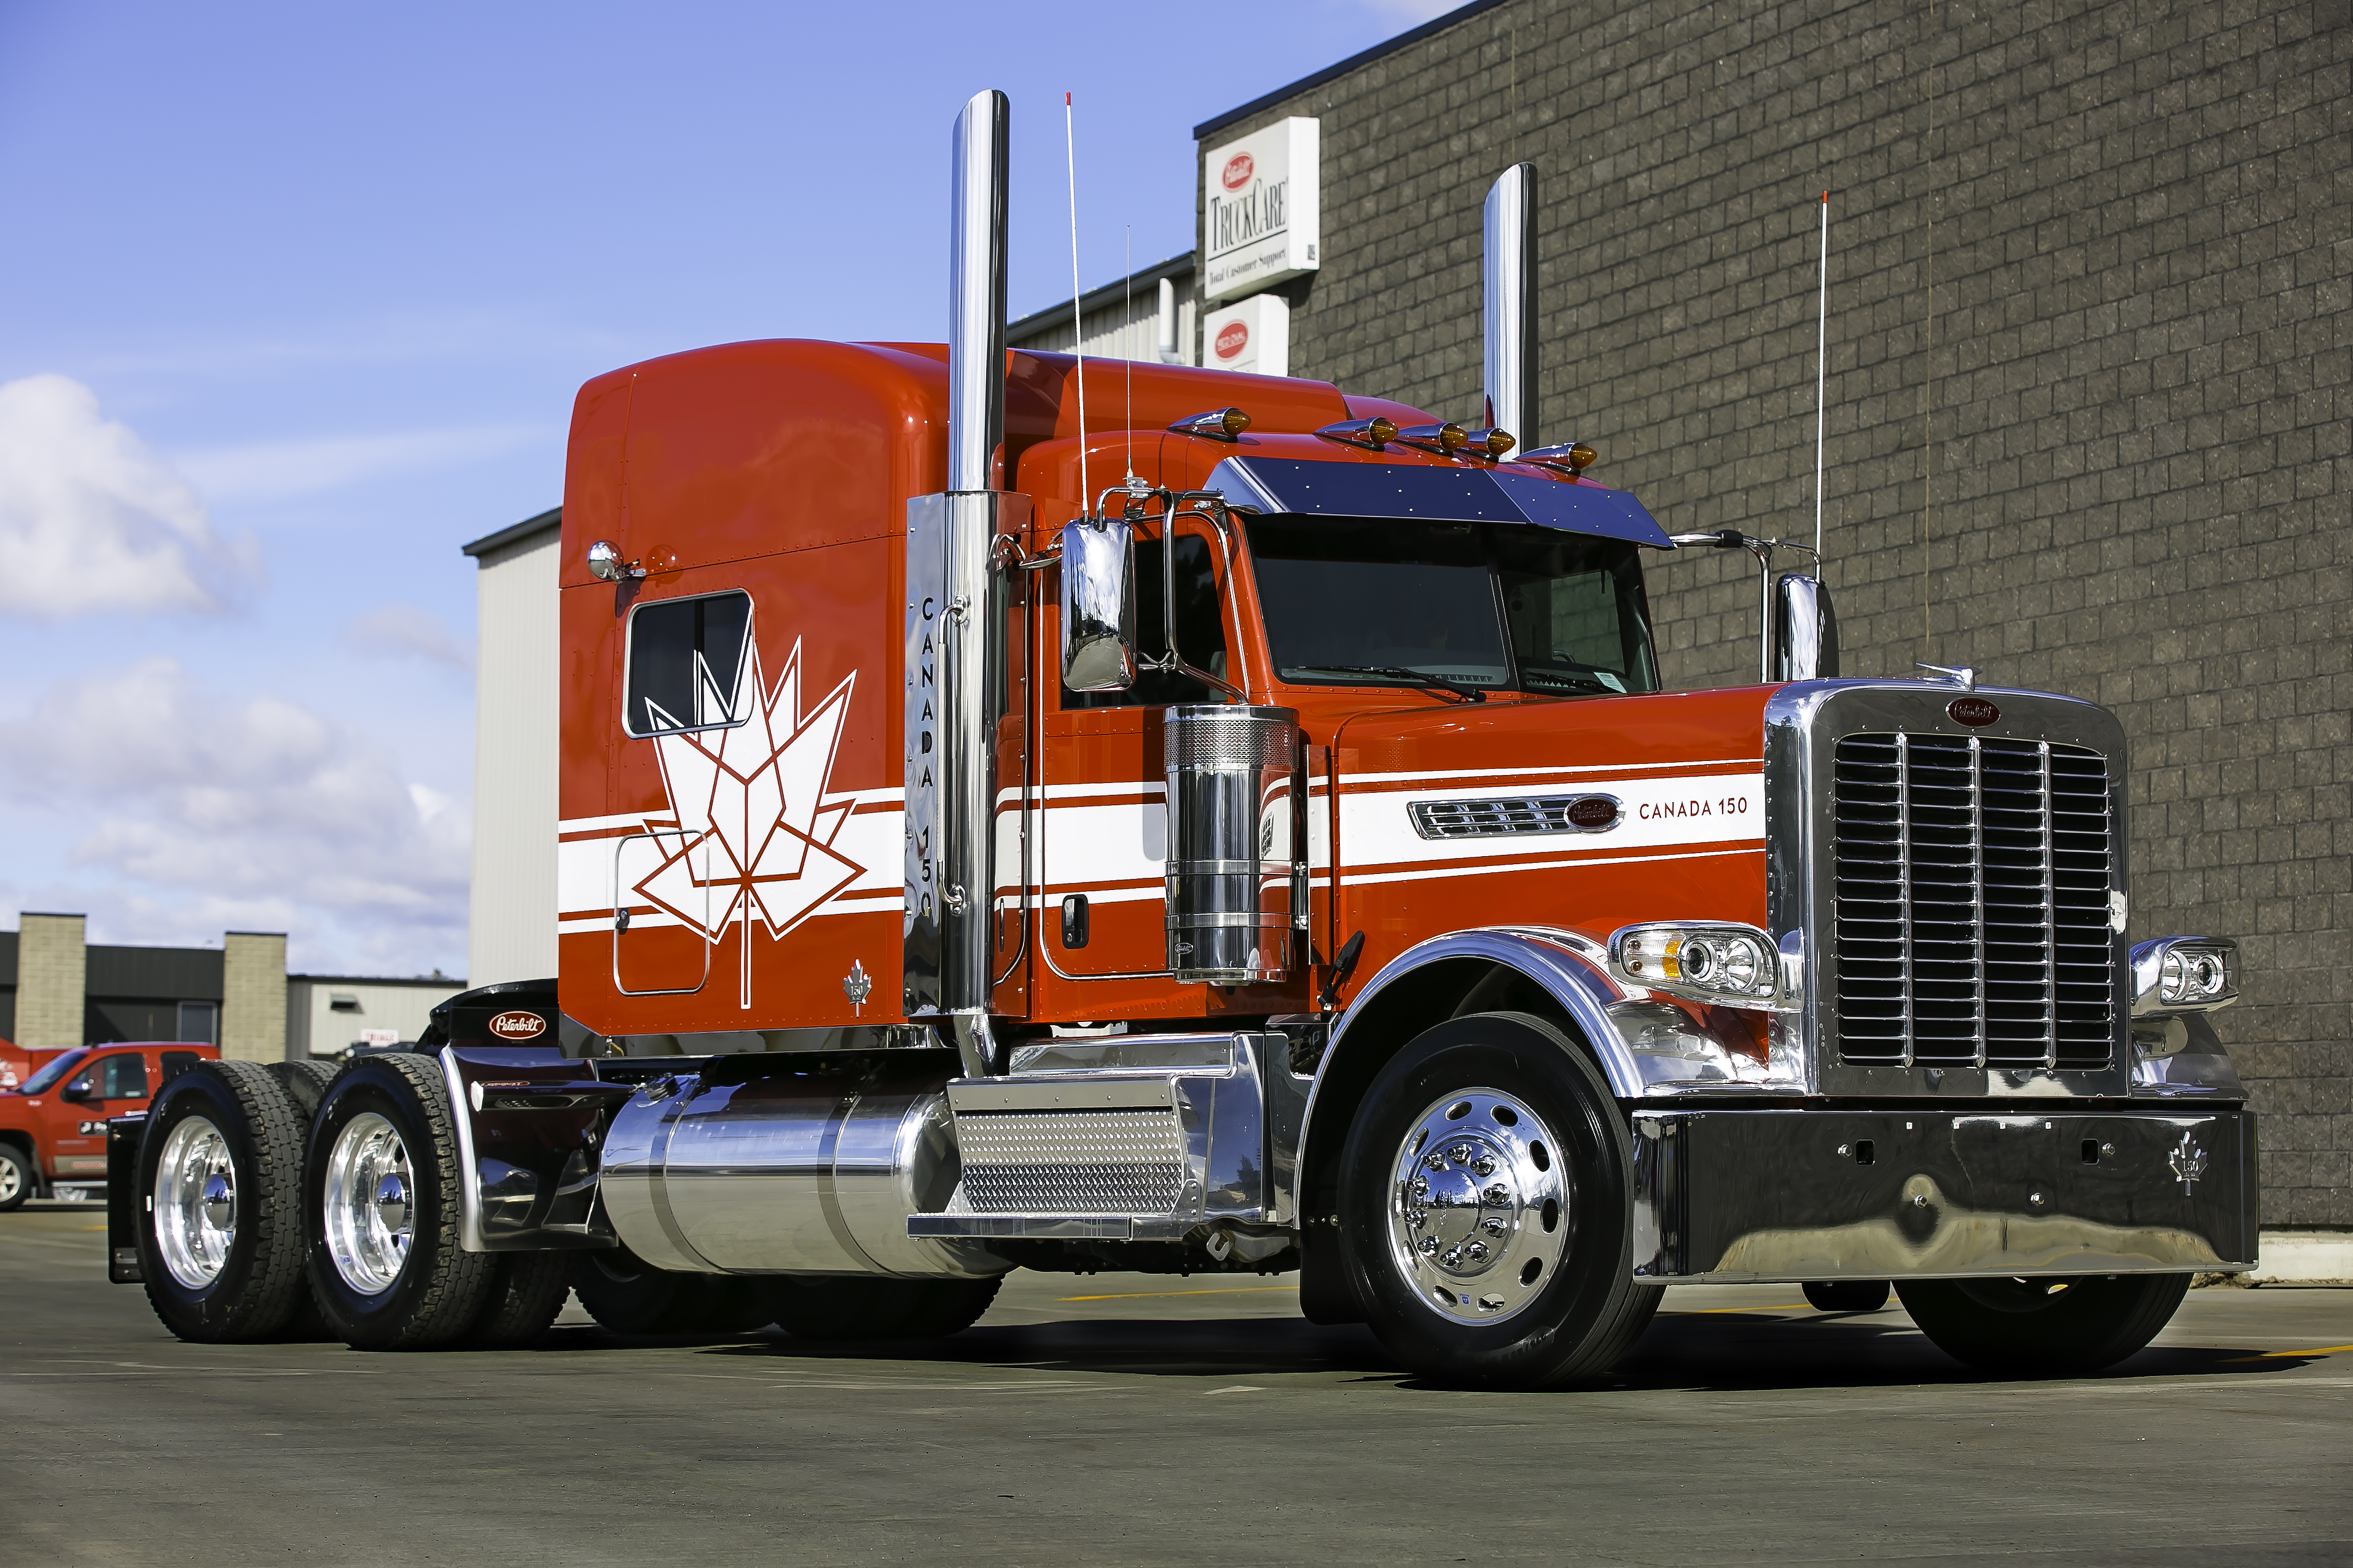 Provencal Trucking First Owner Of Canadian 150 Anniversary